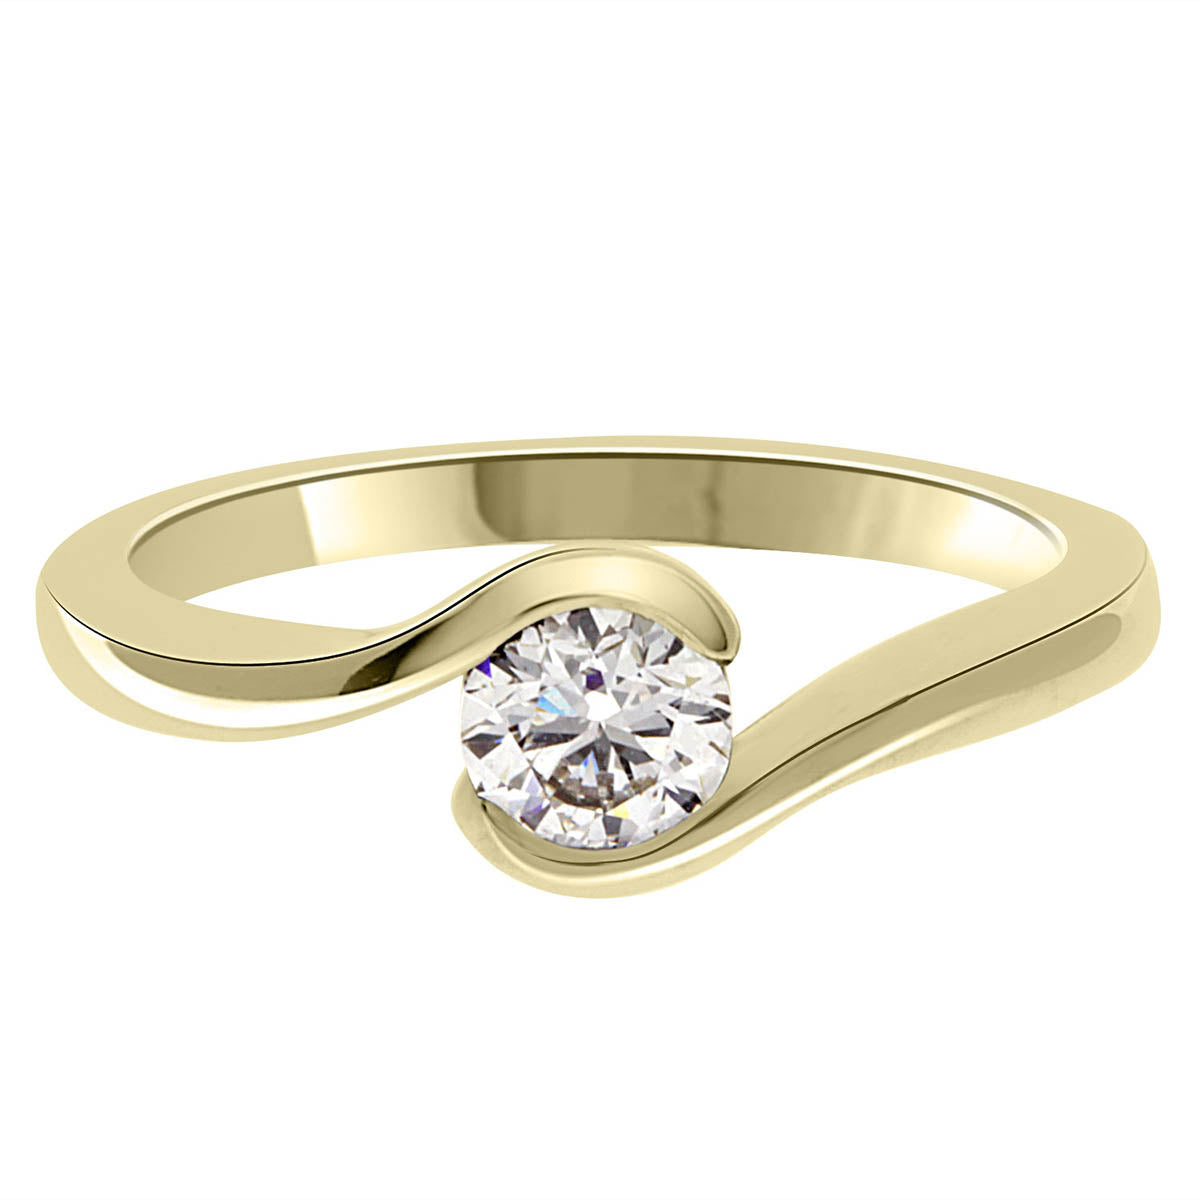 Tension Set Diamond Ring made in yellow gold